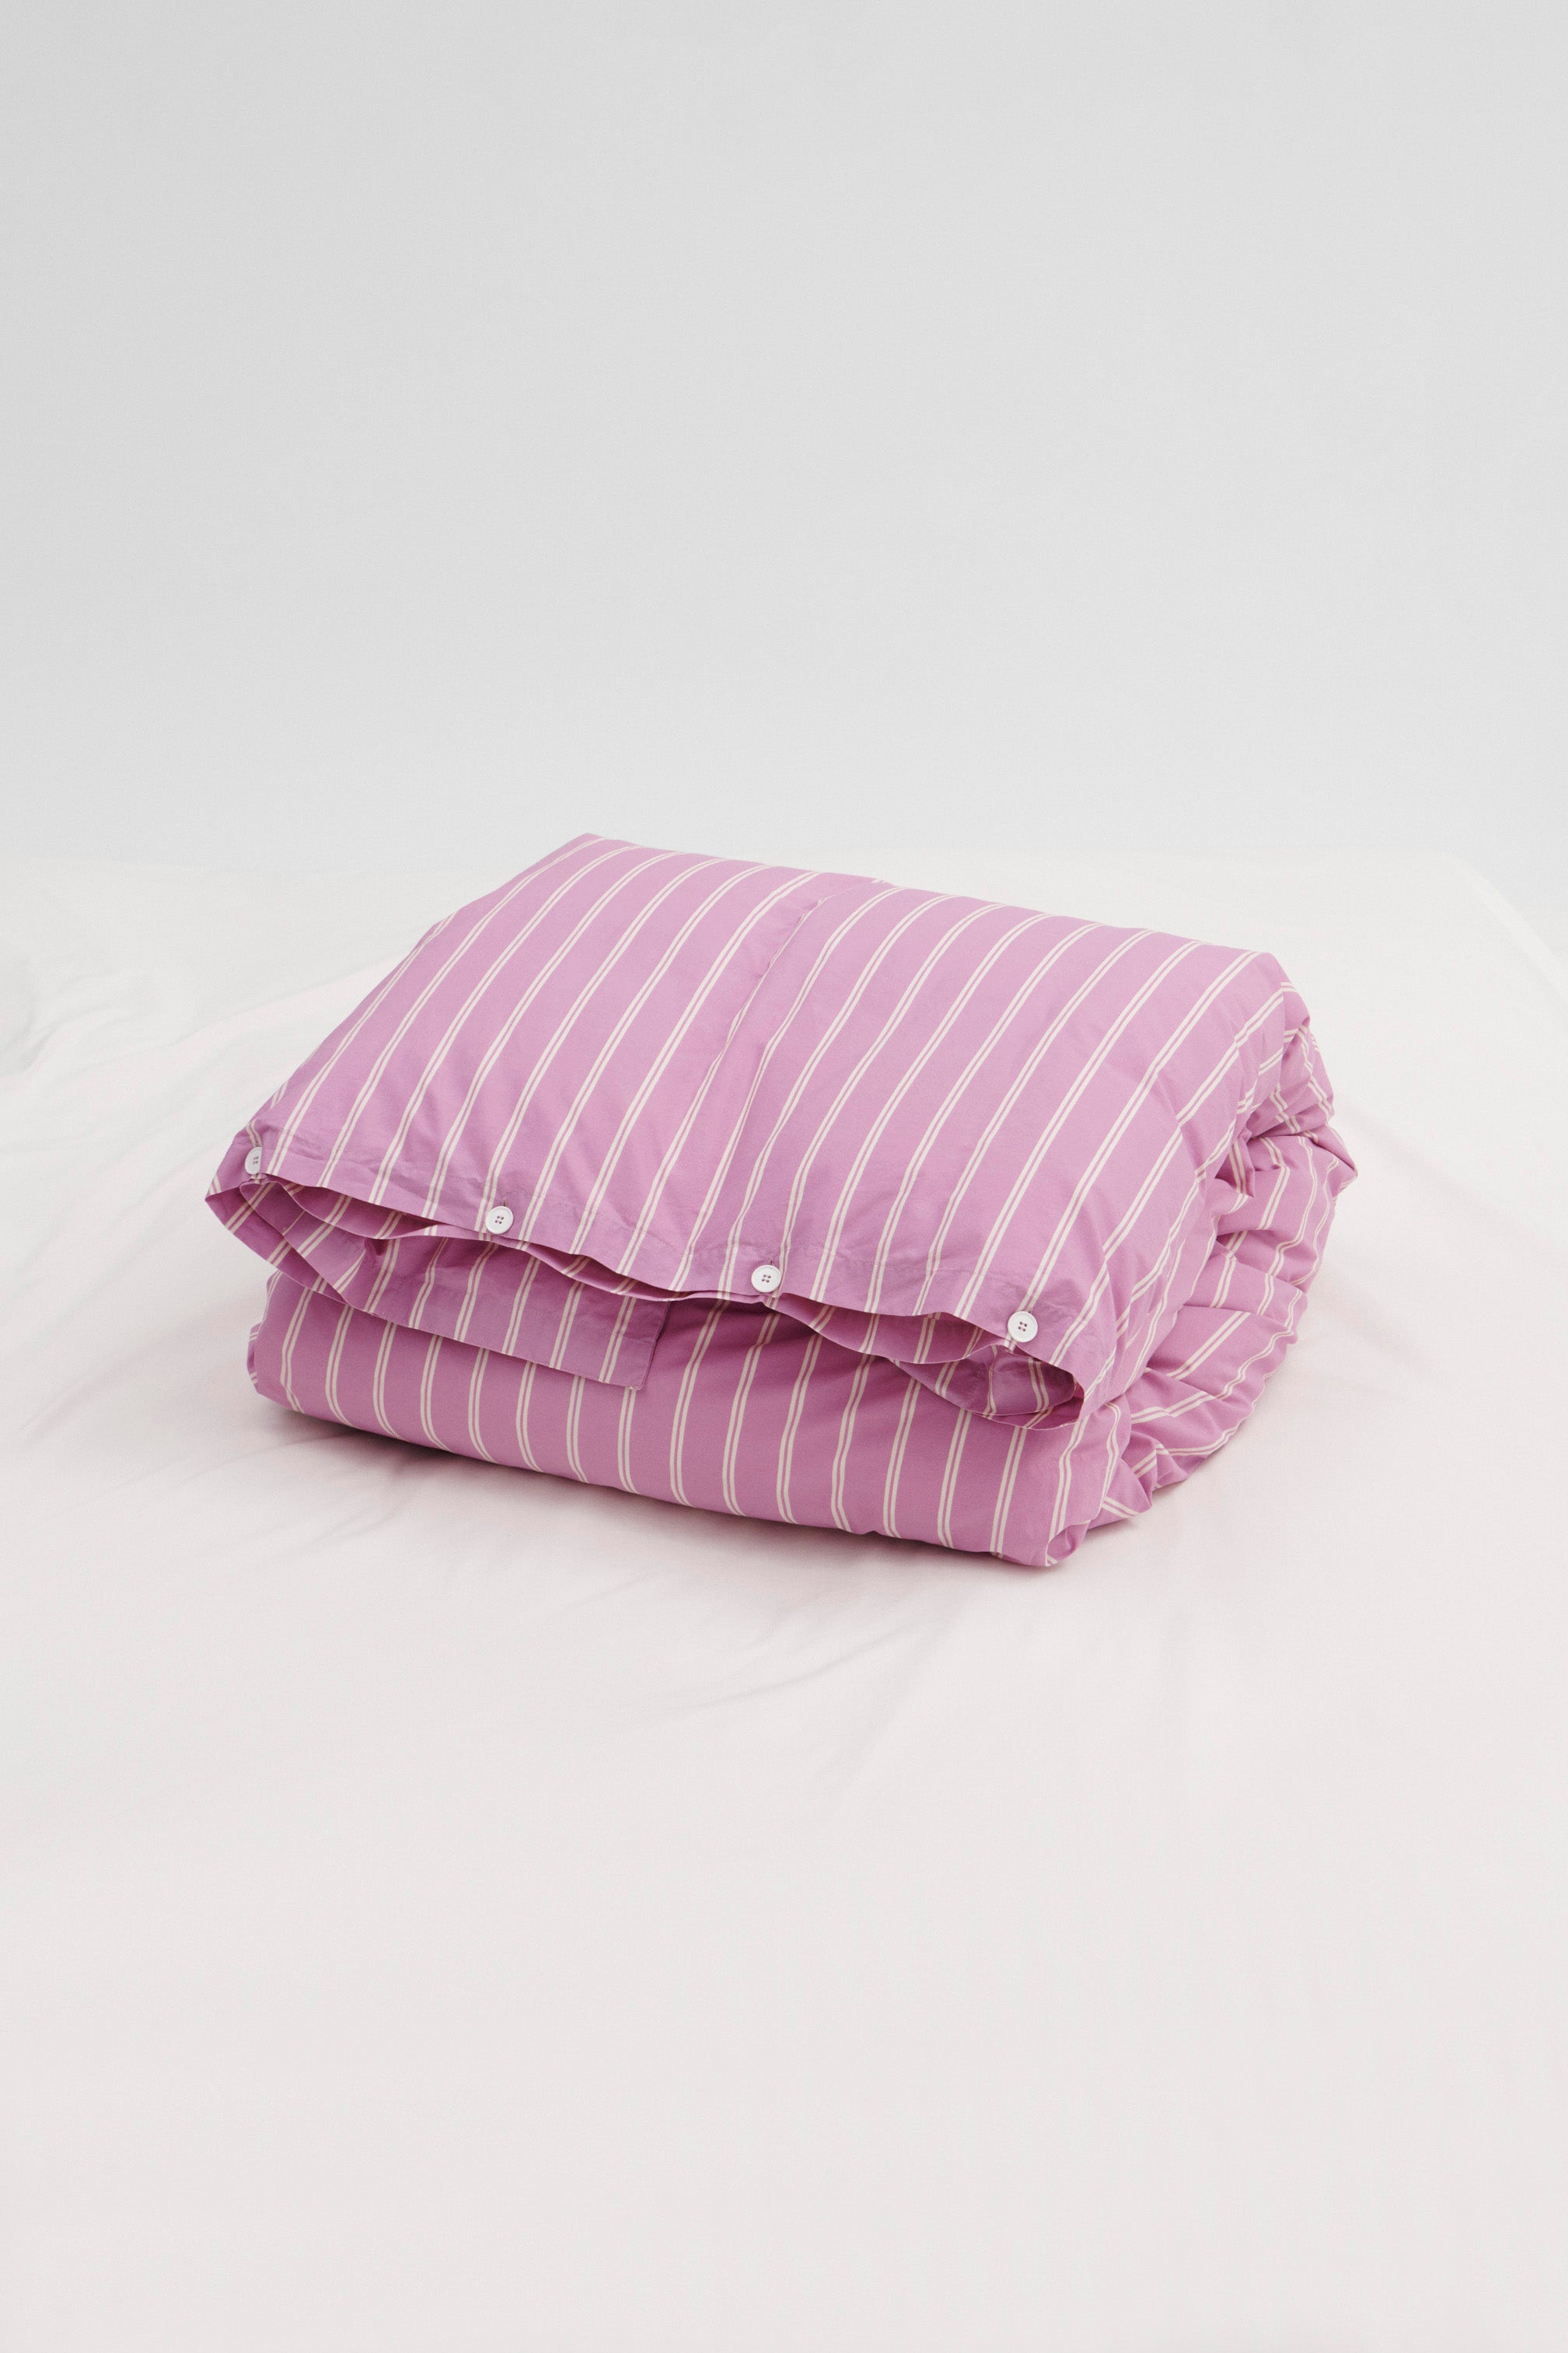 Percale King Duvet Cover Mallow Pink Stripes